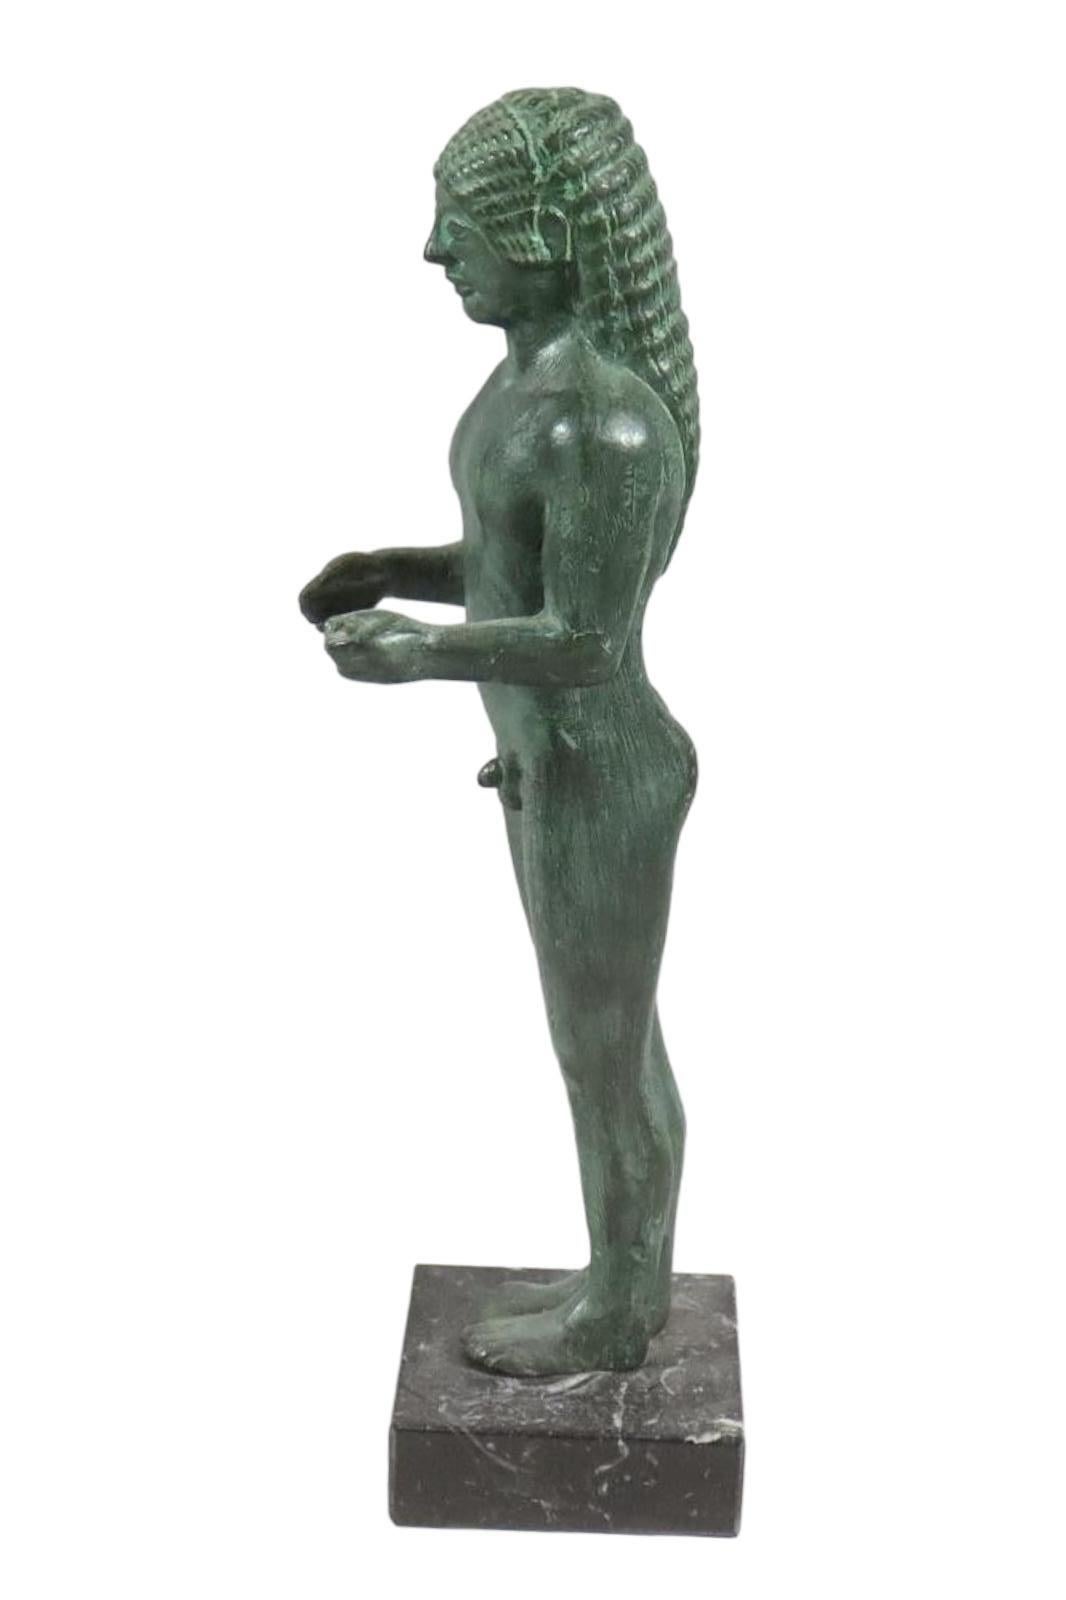 Offered is a Mid-Century Modern Greek patinated sculpture. This Etruscan Greek Statue is an iconic Mid-Century Modern item of decor. It would look fabulous on a console table, in a book shelf, center table, étagère and so many other decorative areas